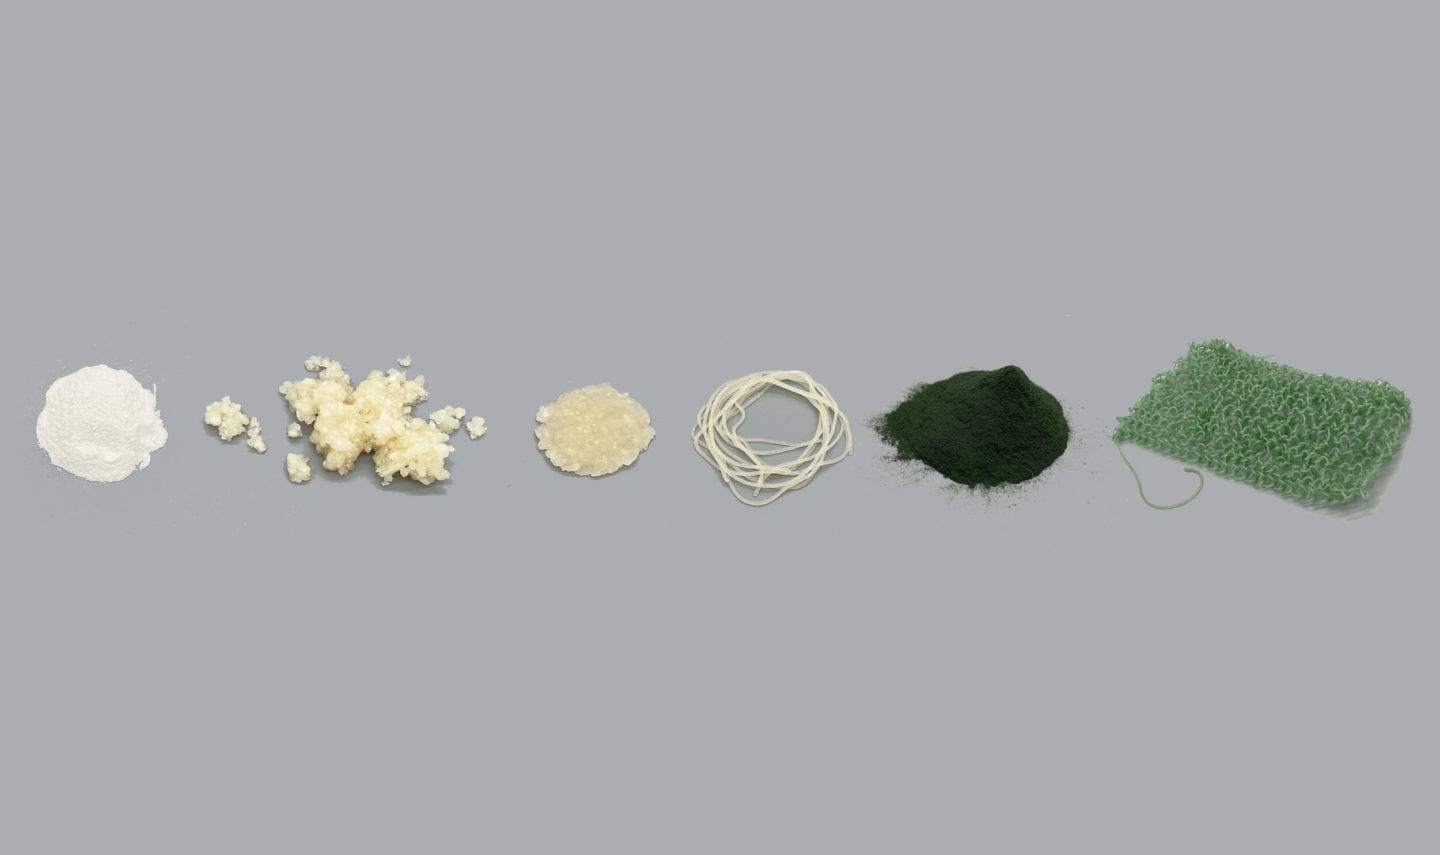 Algae broken down and shaped into different forms including powder, thread and yarn